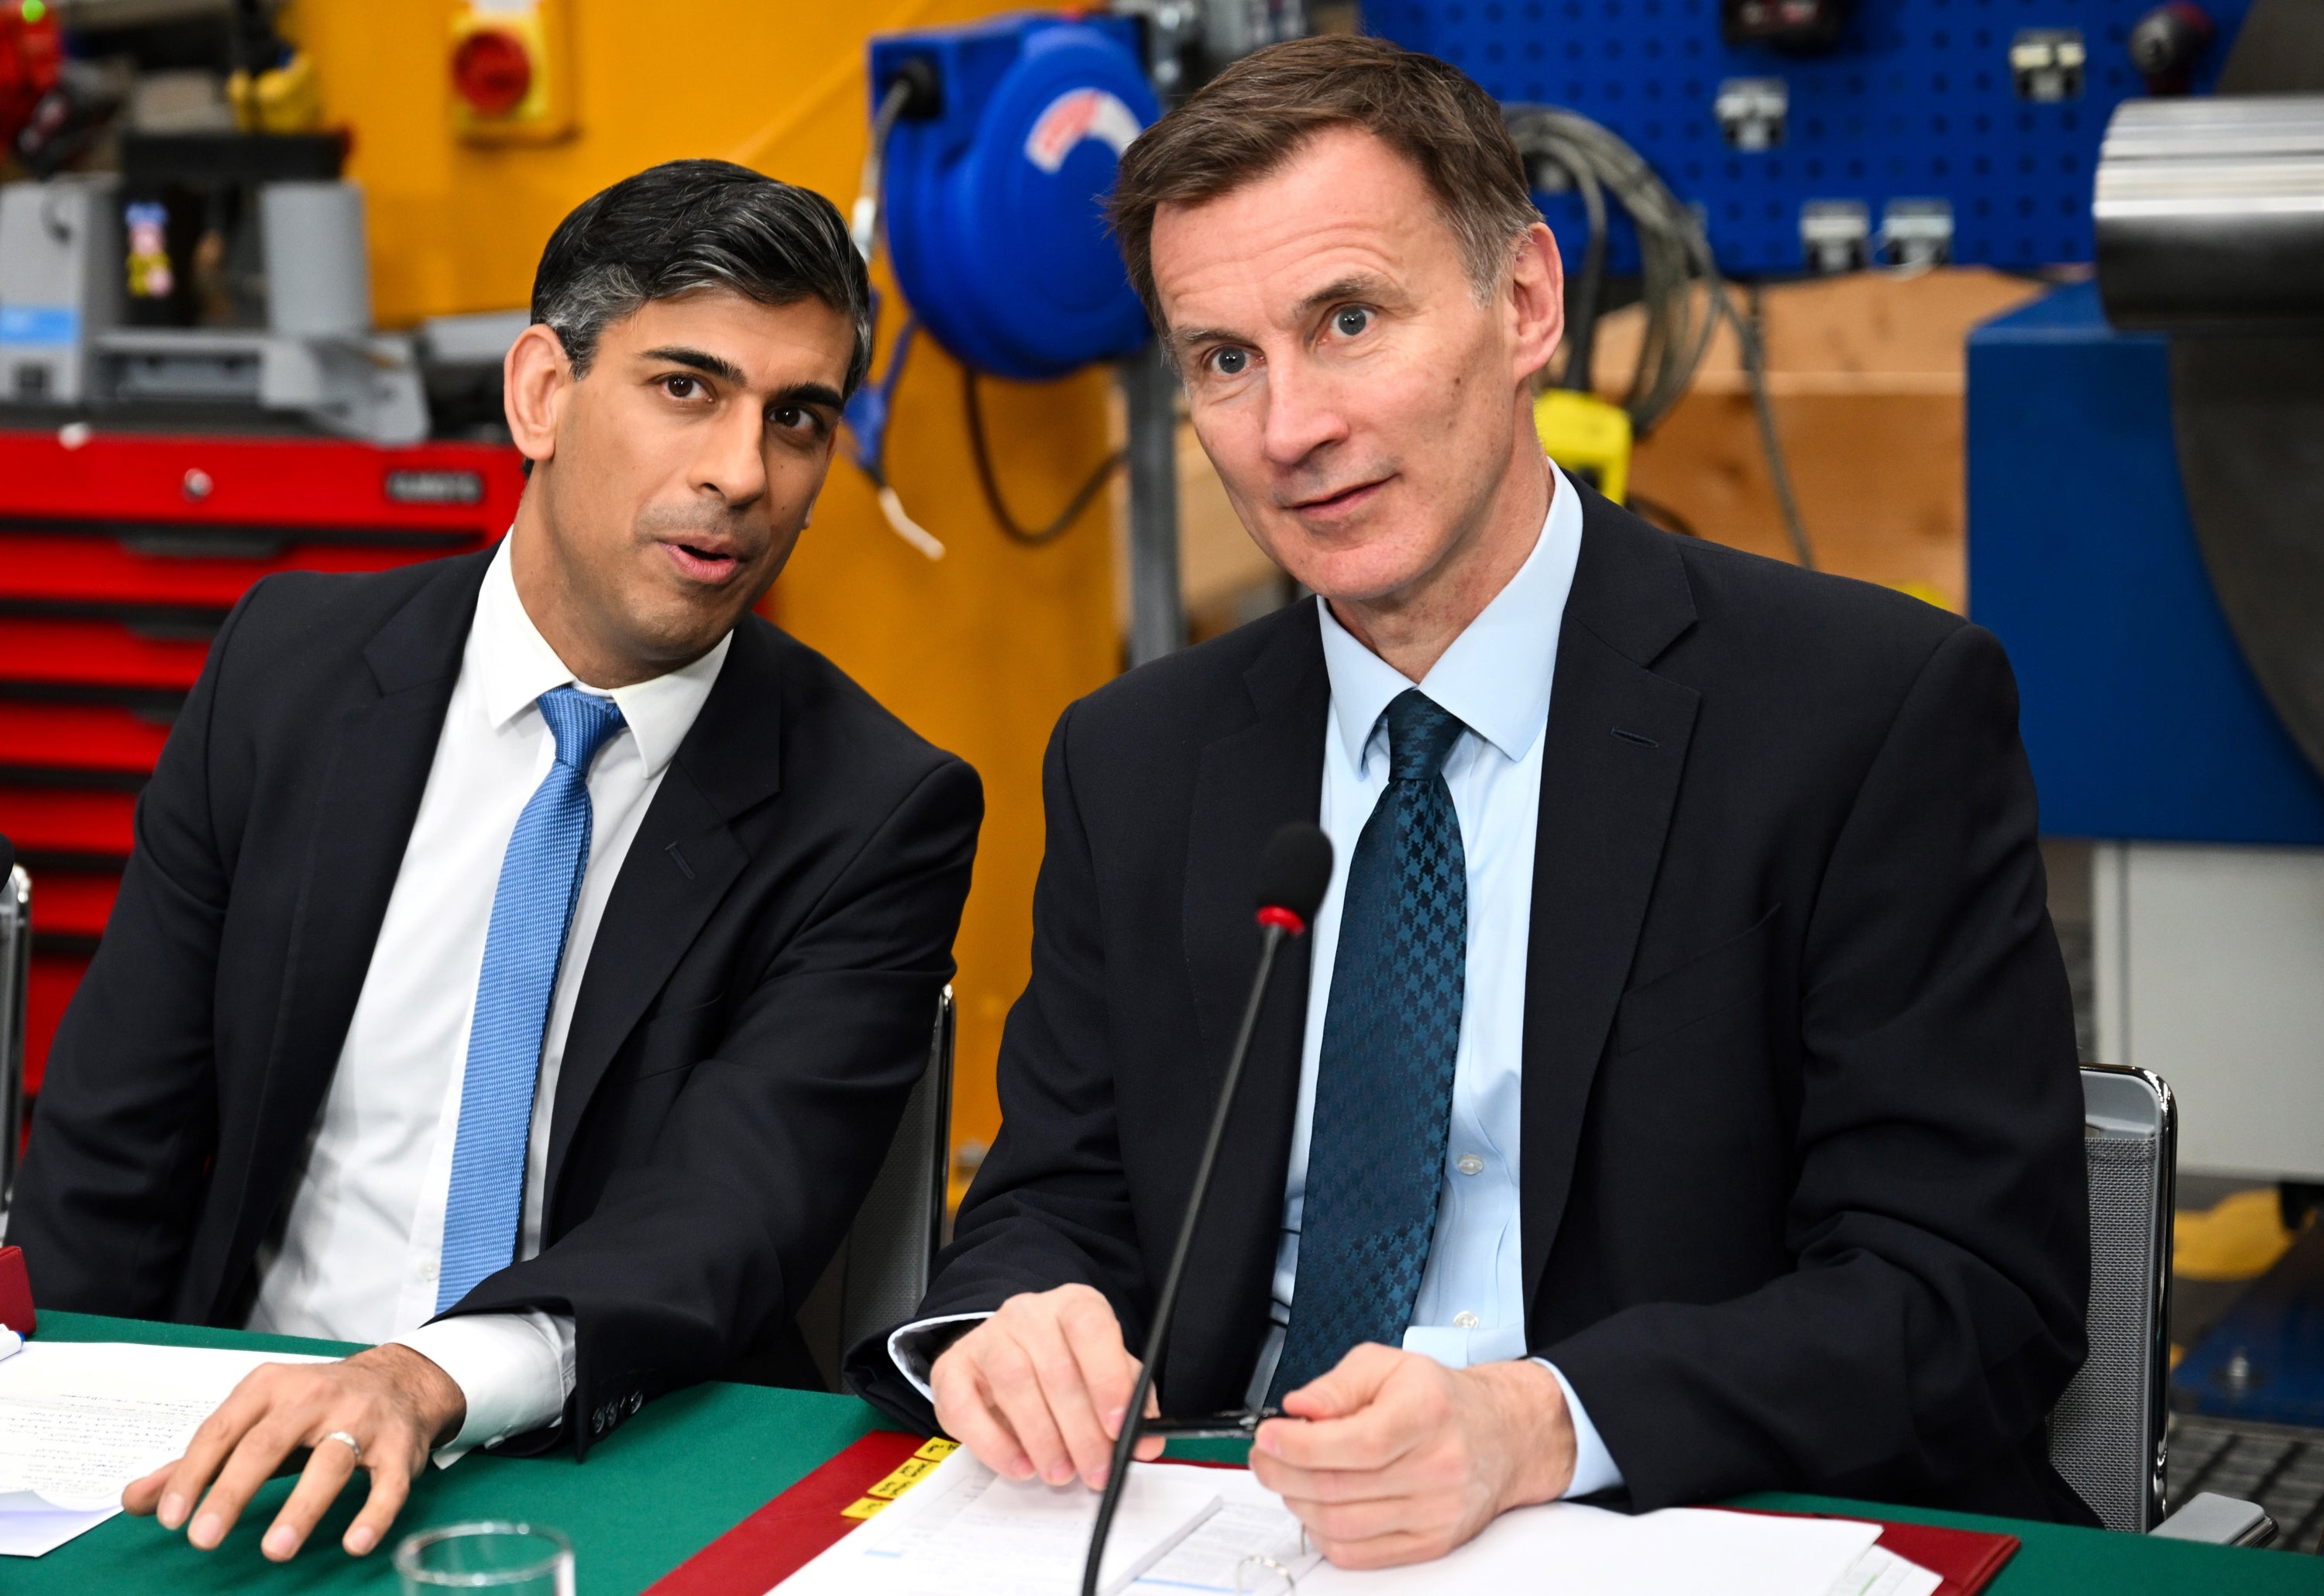 will the uk get a tax cut in jeremy hunt’s 2024 spring budget?